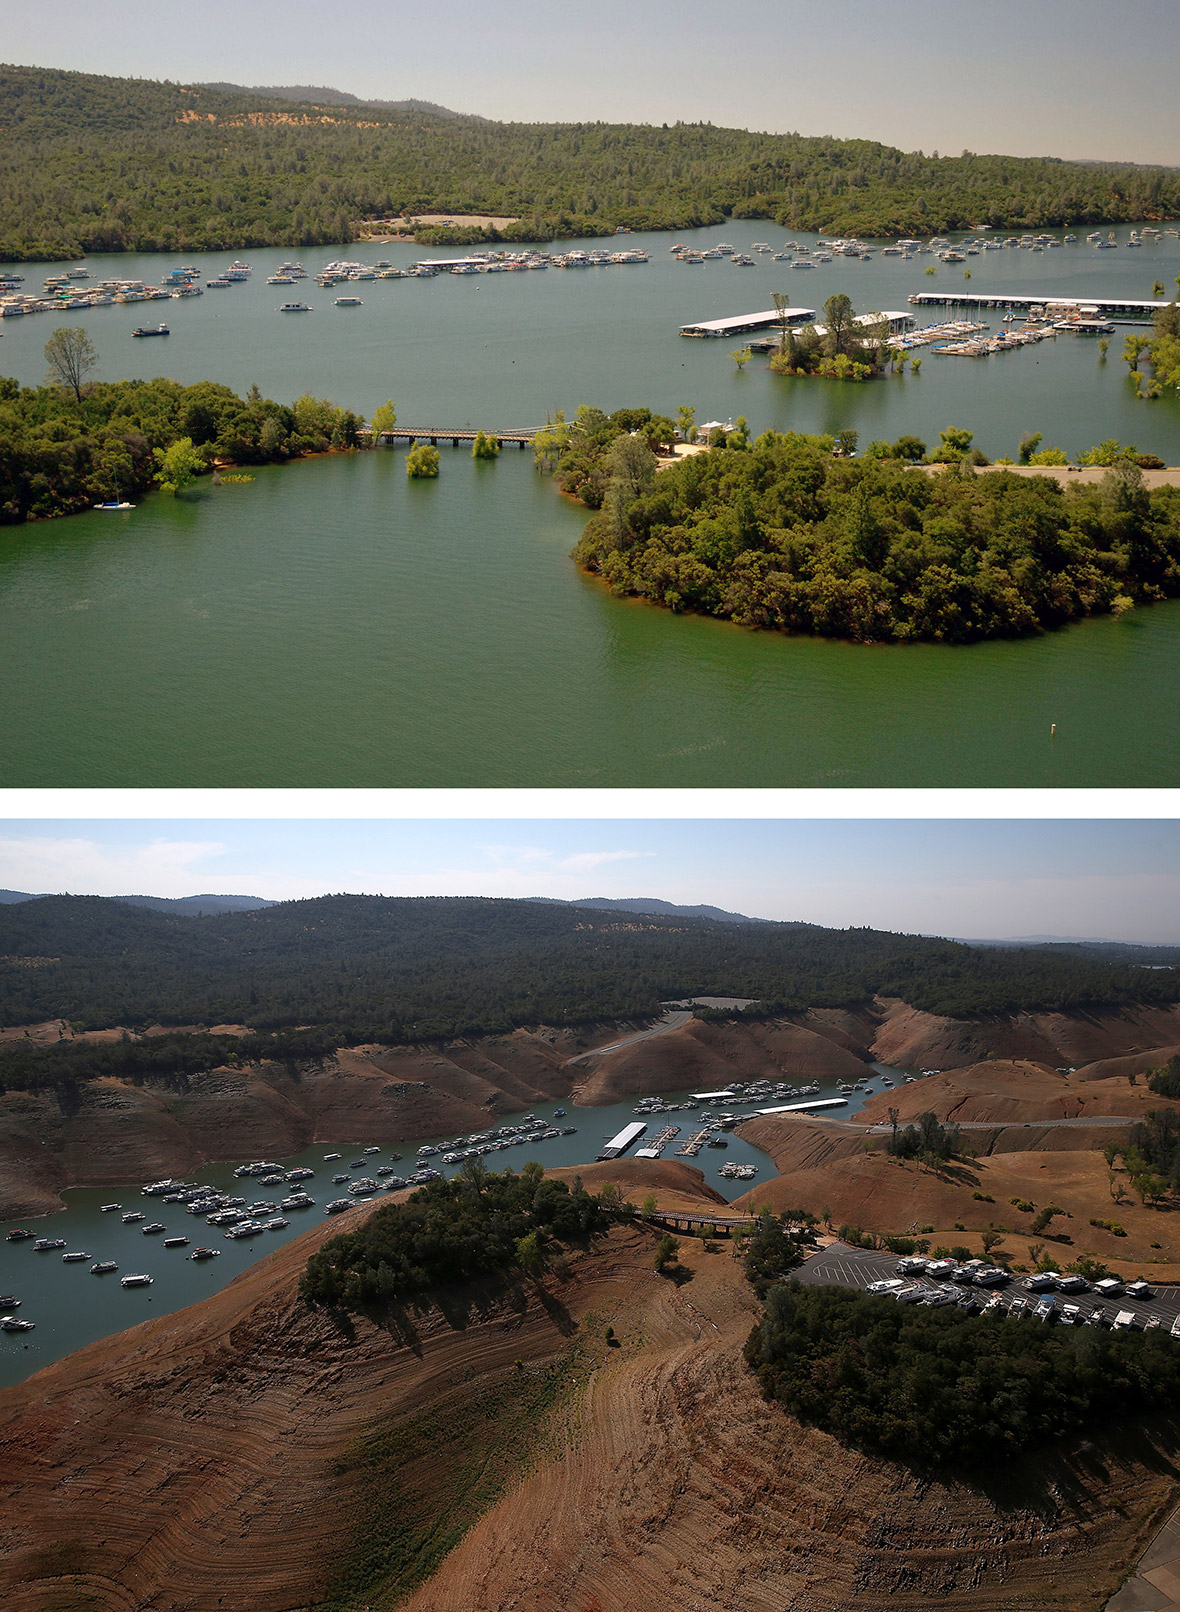 California Drought Before and After Photos Show Falling Water Levels